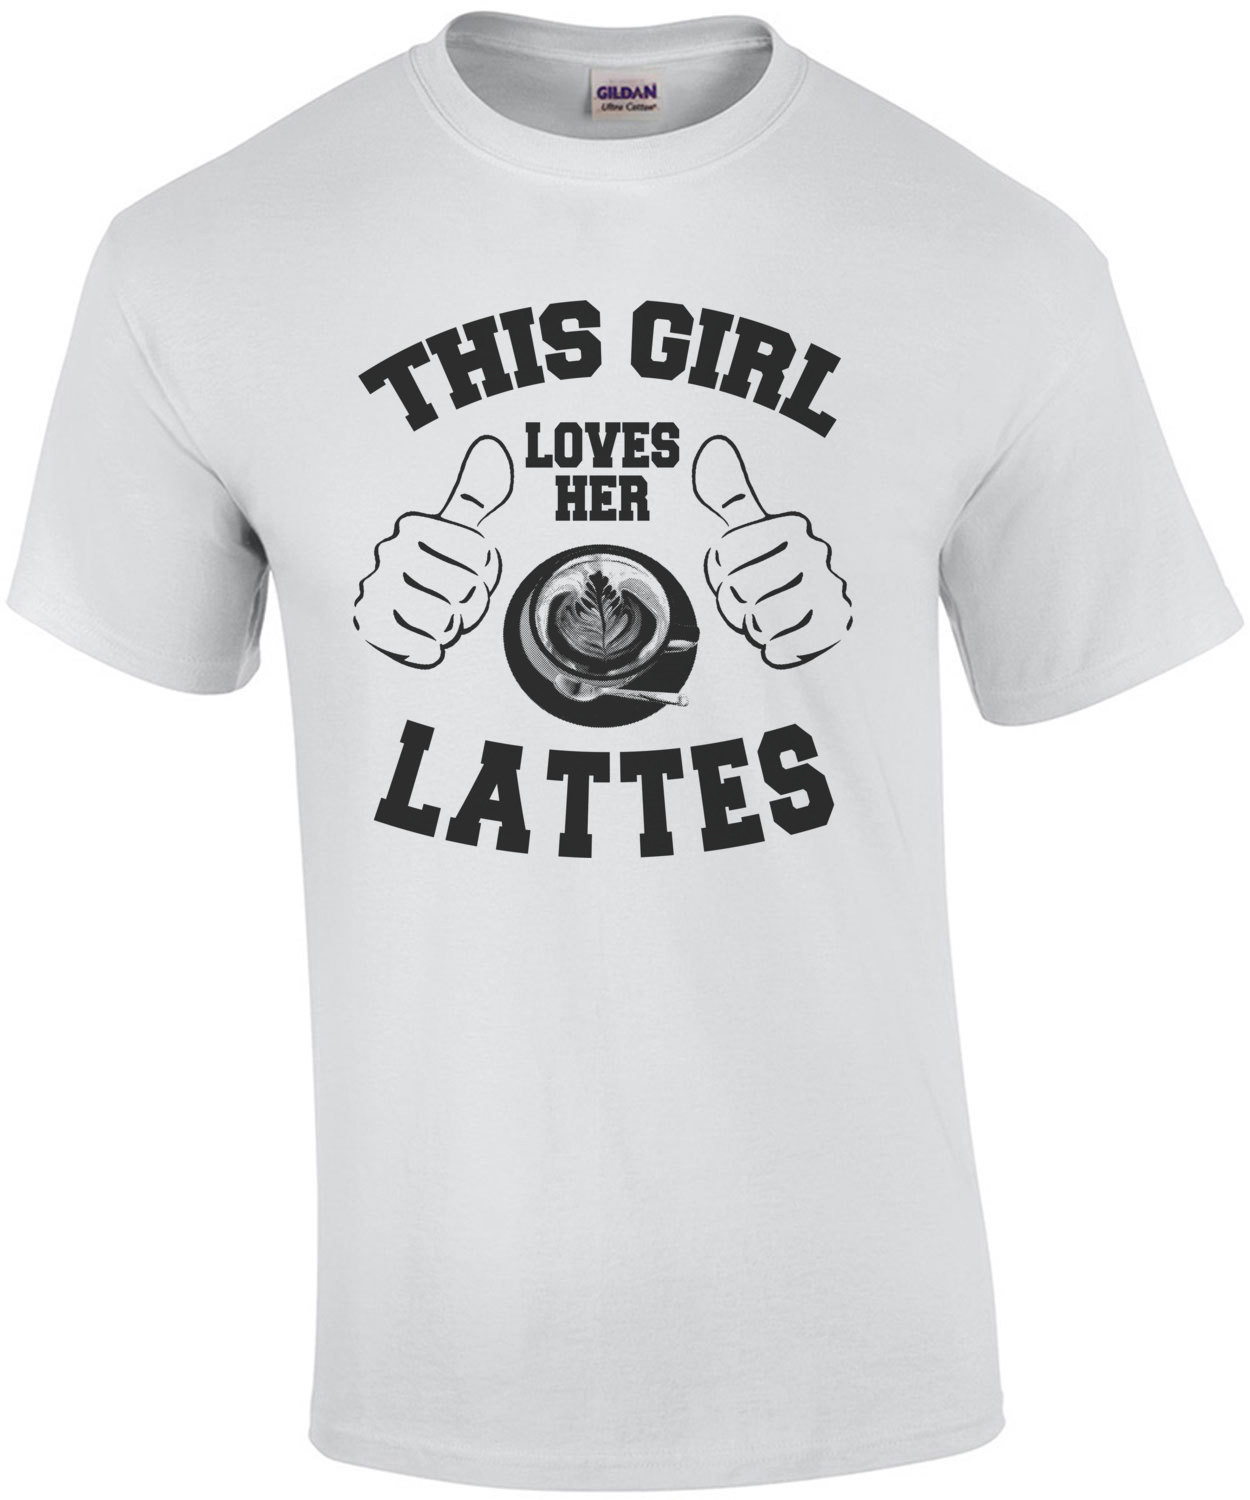 This Girl Loves Her Lattes T-Shirt